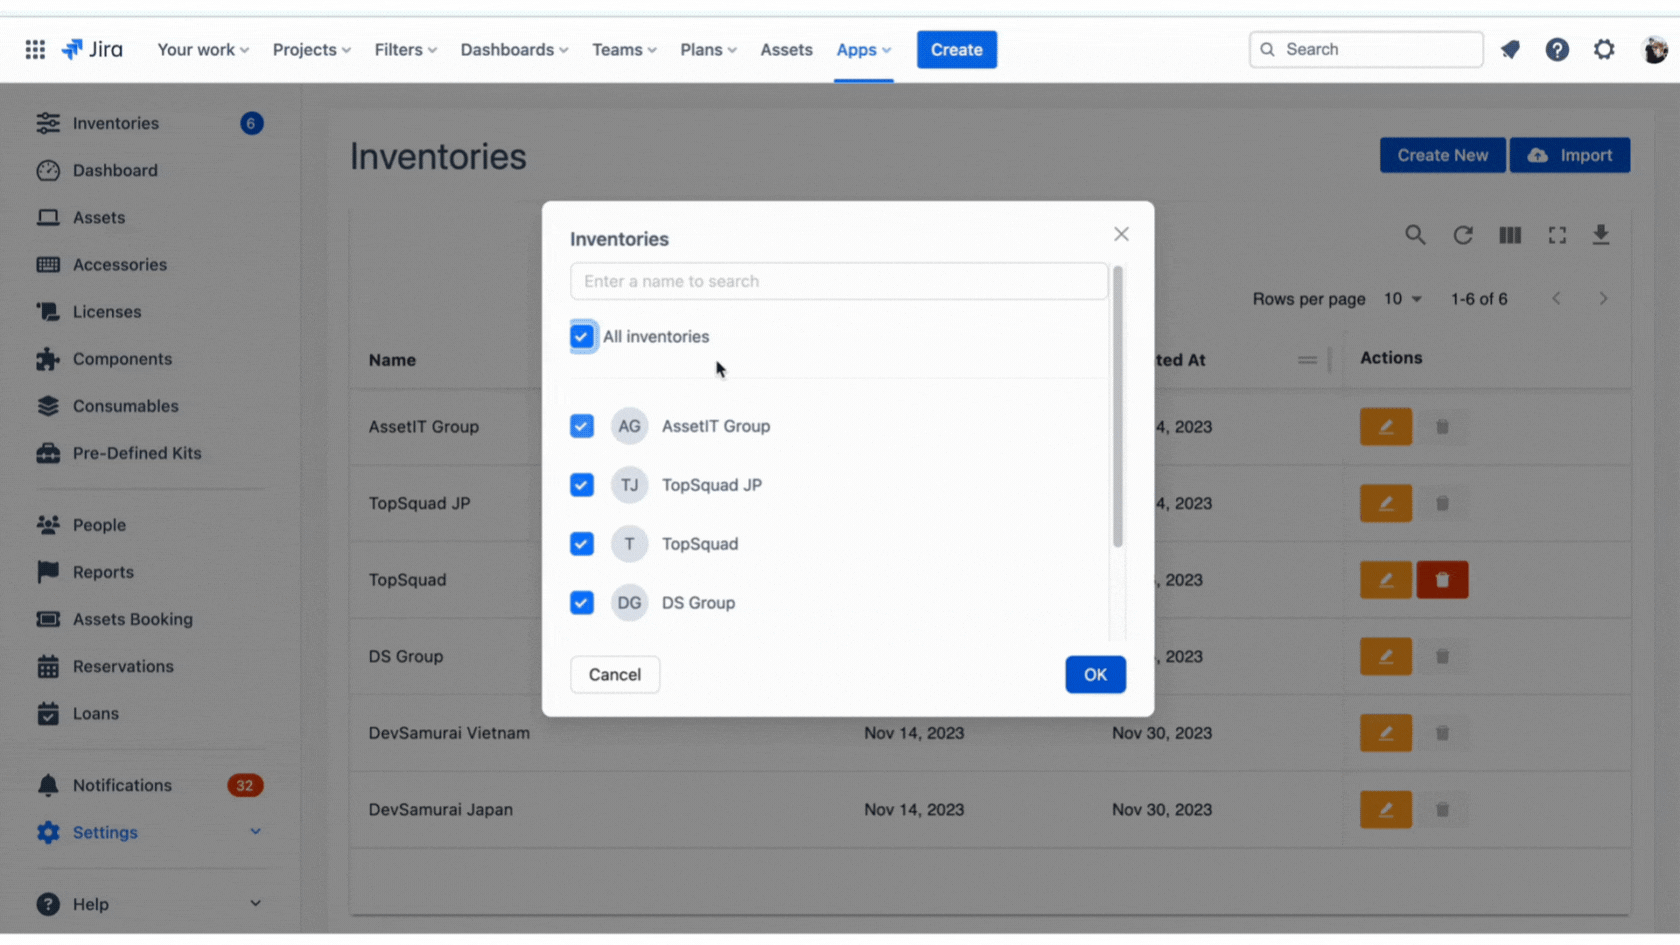 AssetIT - inventory management for Jira